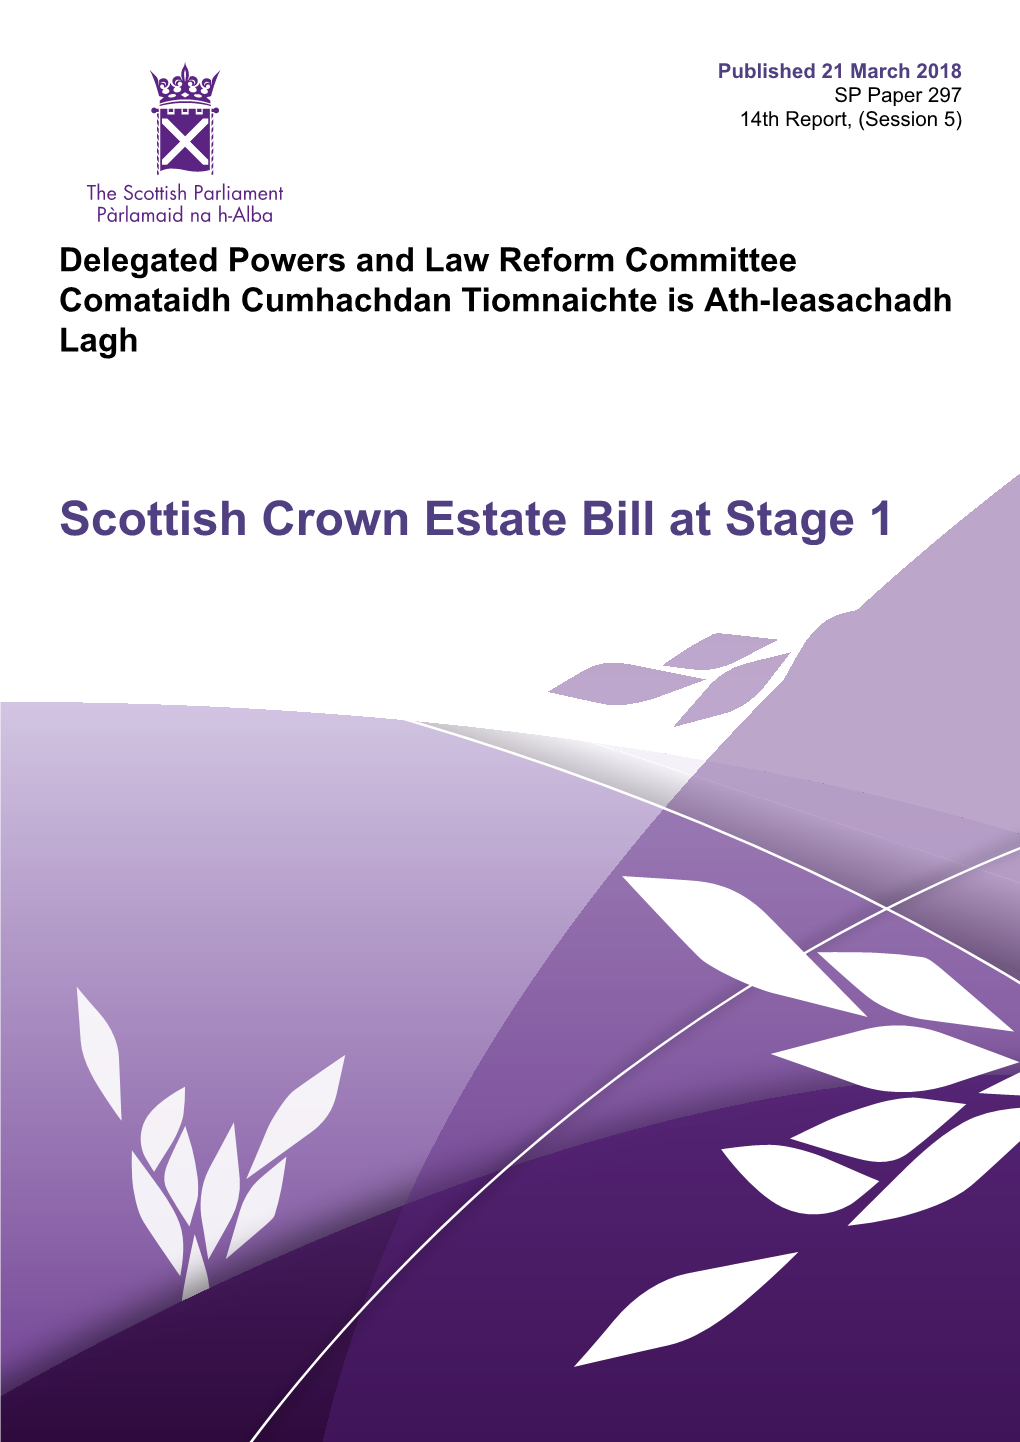 Scottish Crown Estate Bill at Stage 1 Published in Scotland by the Scottish Parliamentary Corporate Body